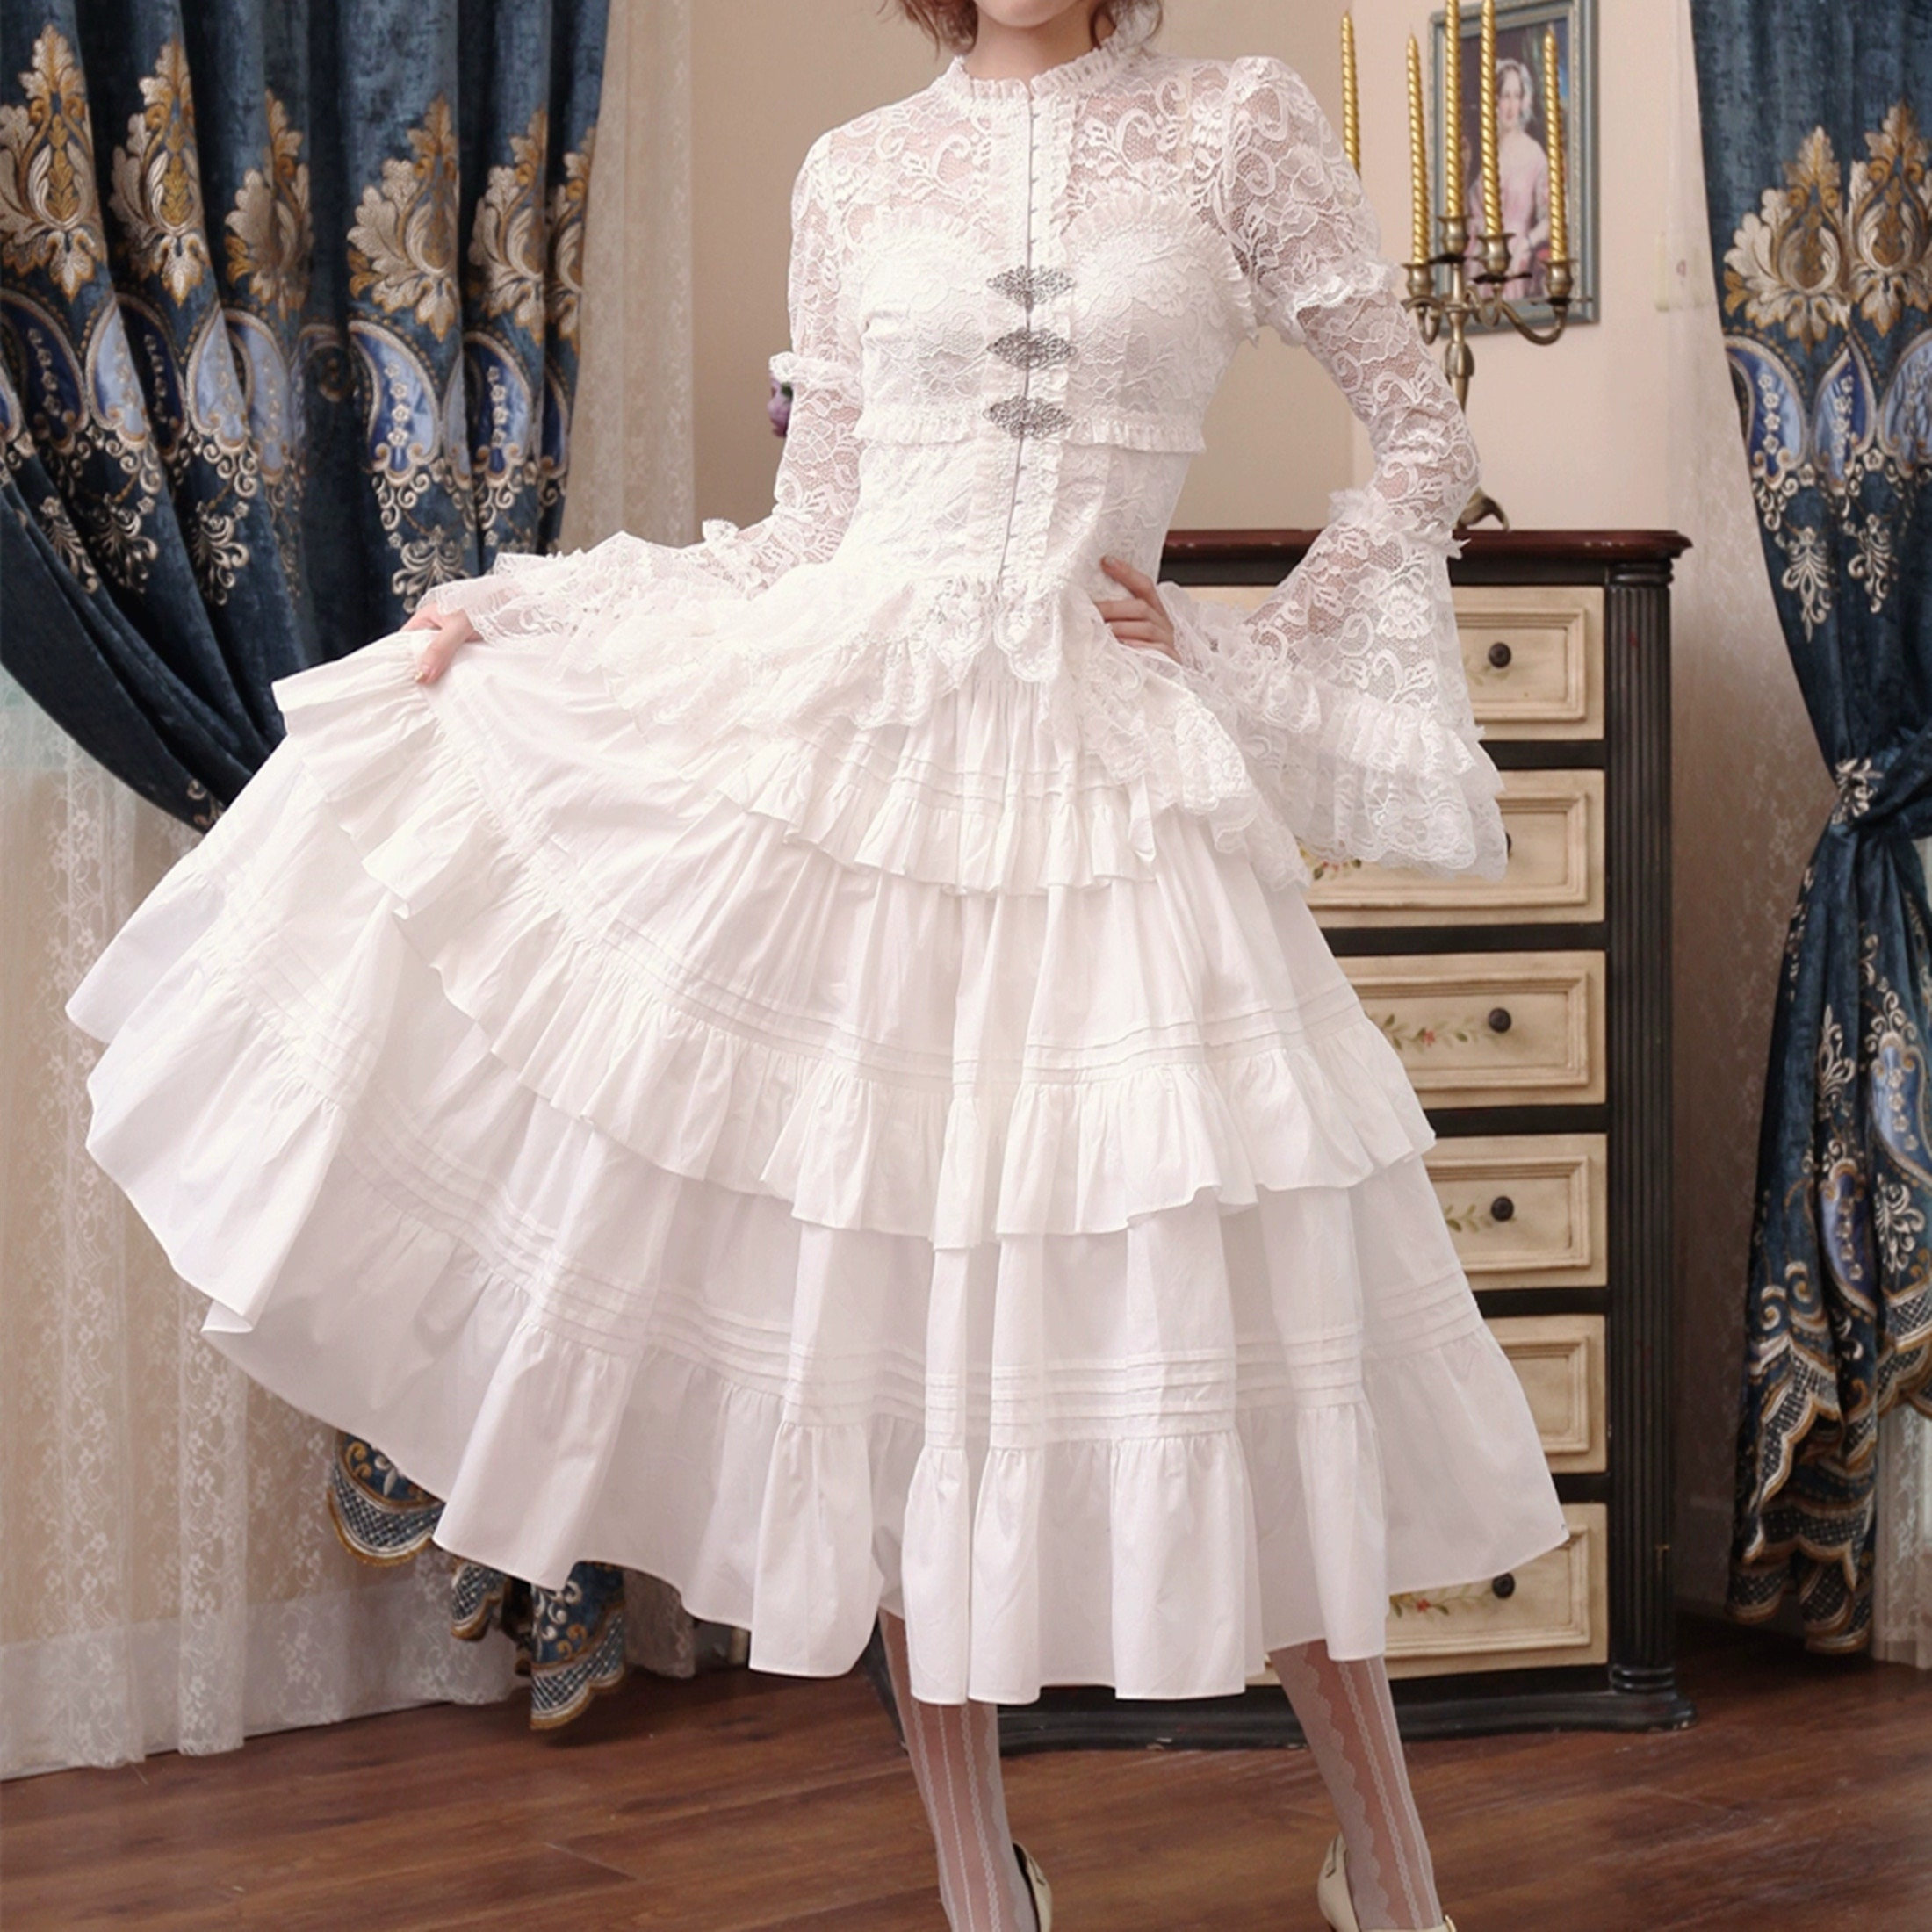 White Lace Shirt with Ruffle Skirt - Y2K Clothing